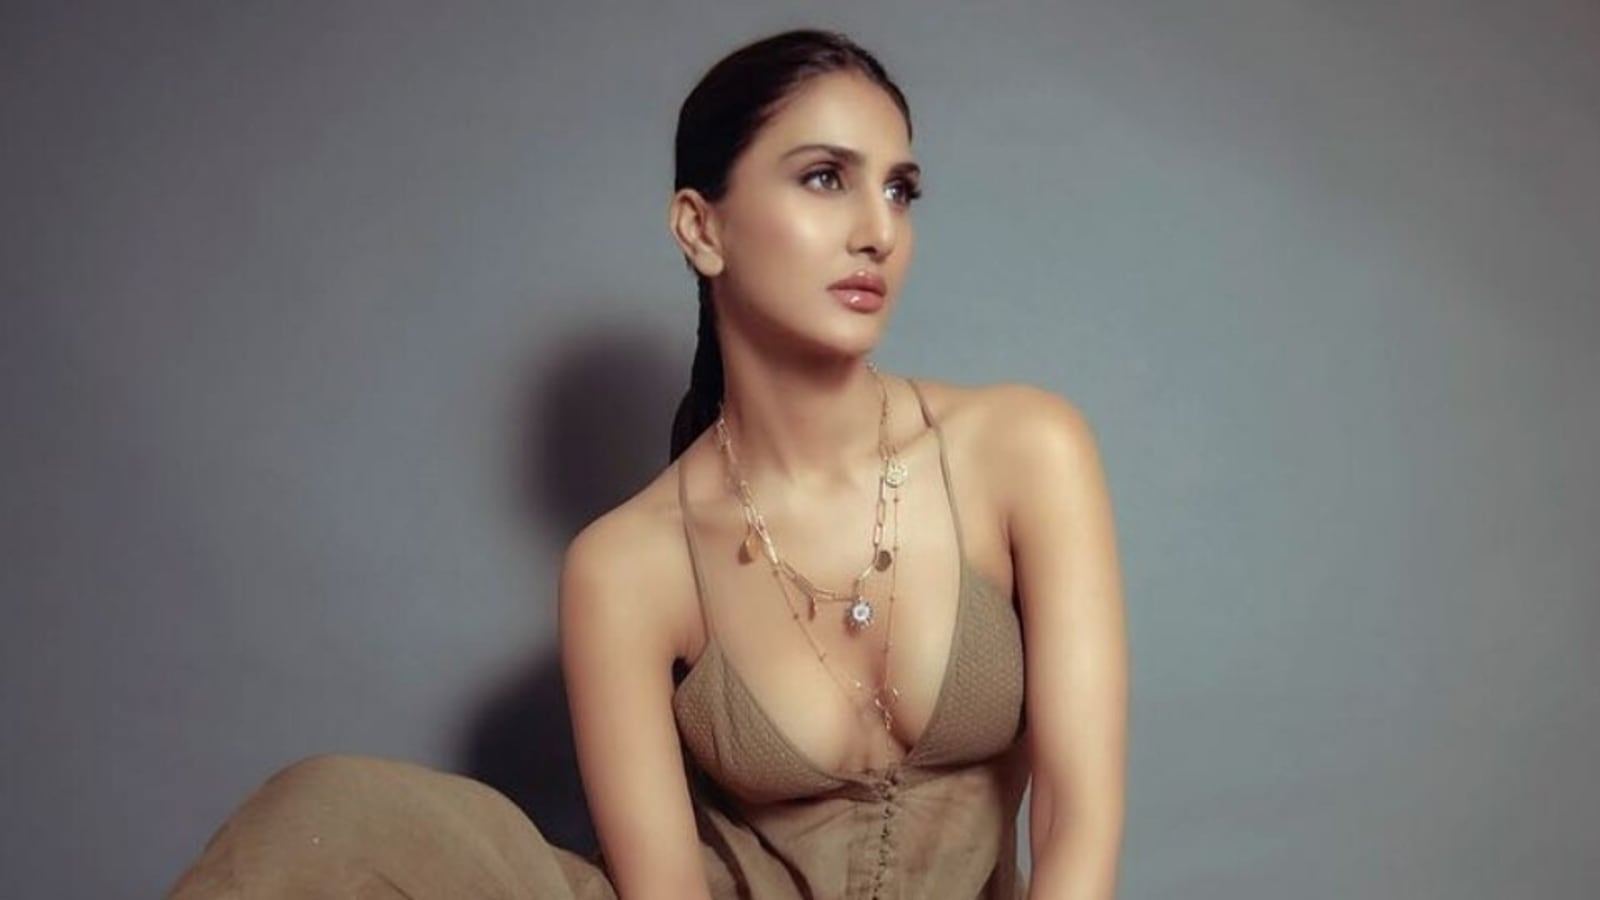 VaaniKapoor sets temperatures soaring in stylish white fringe pants and  crop top in her latest photo-shoot